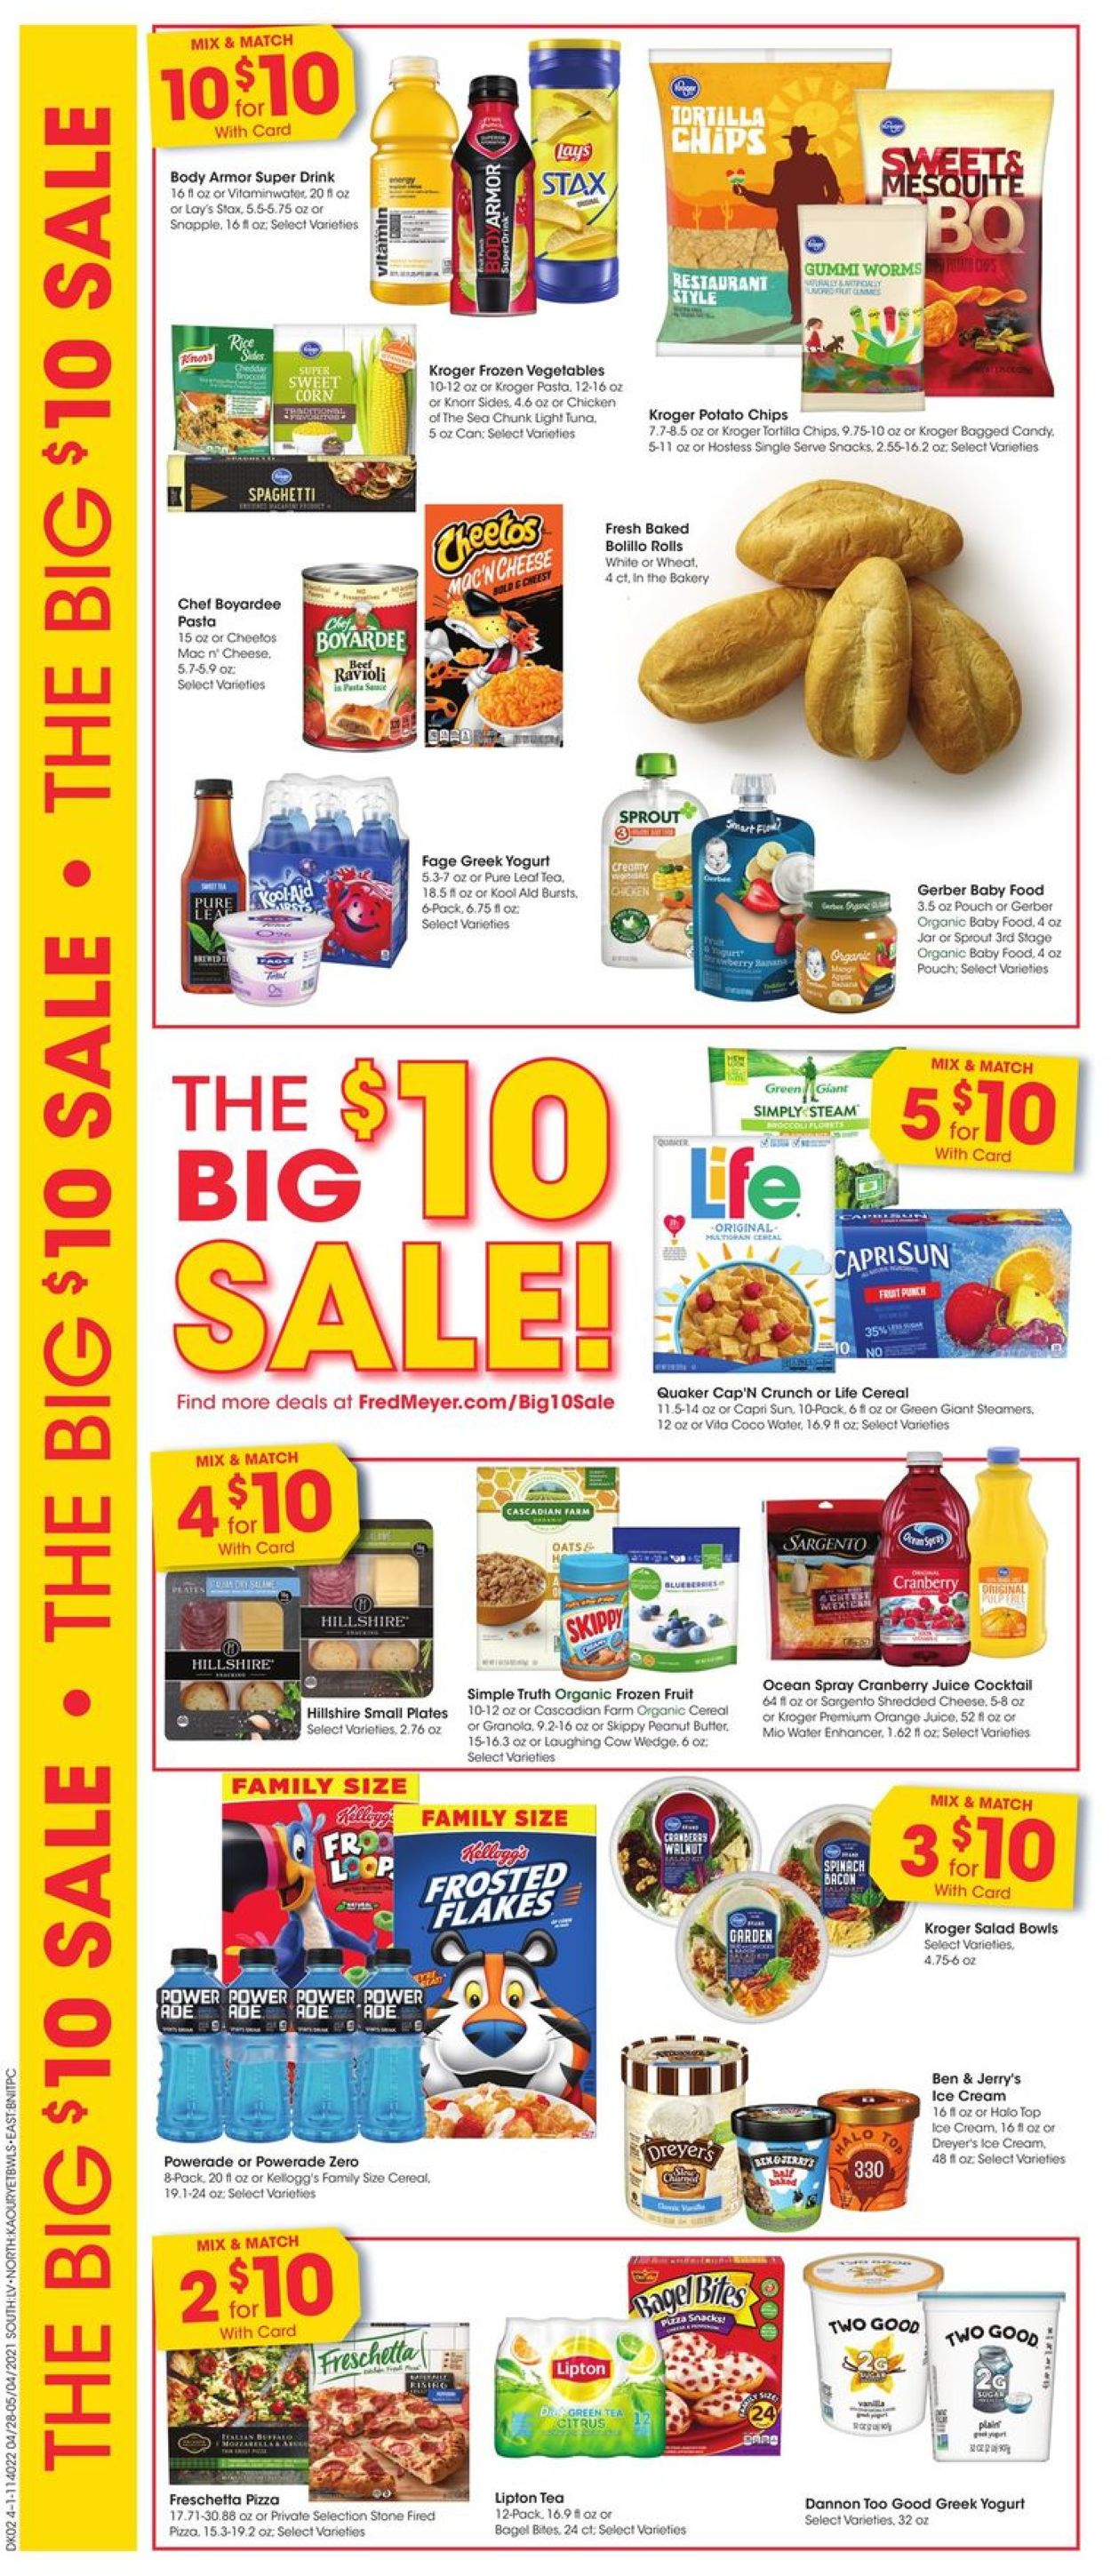 Fred Meyer Weekly Ad Circular - valid 04/28-05/04/2021 (Page 8)